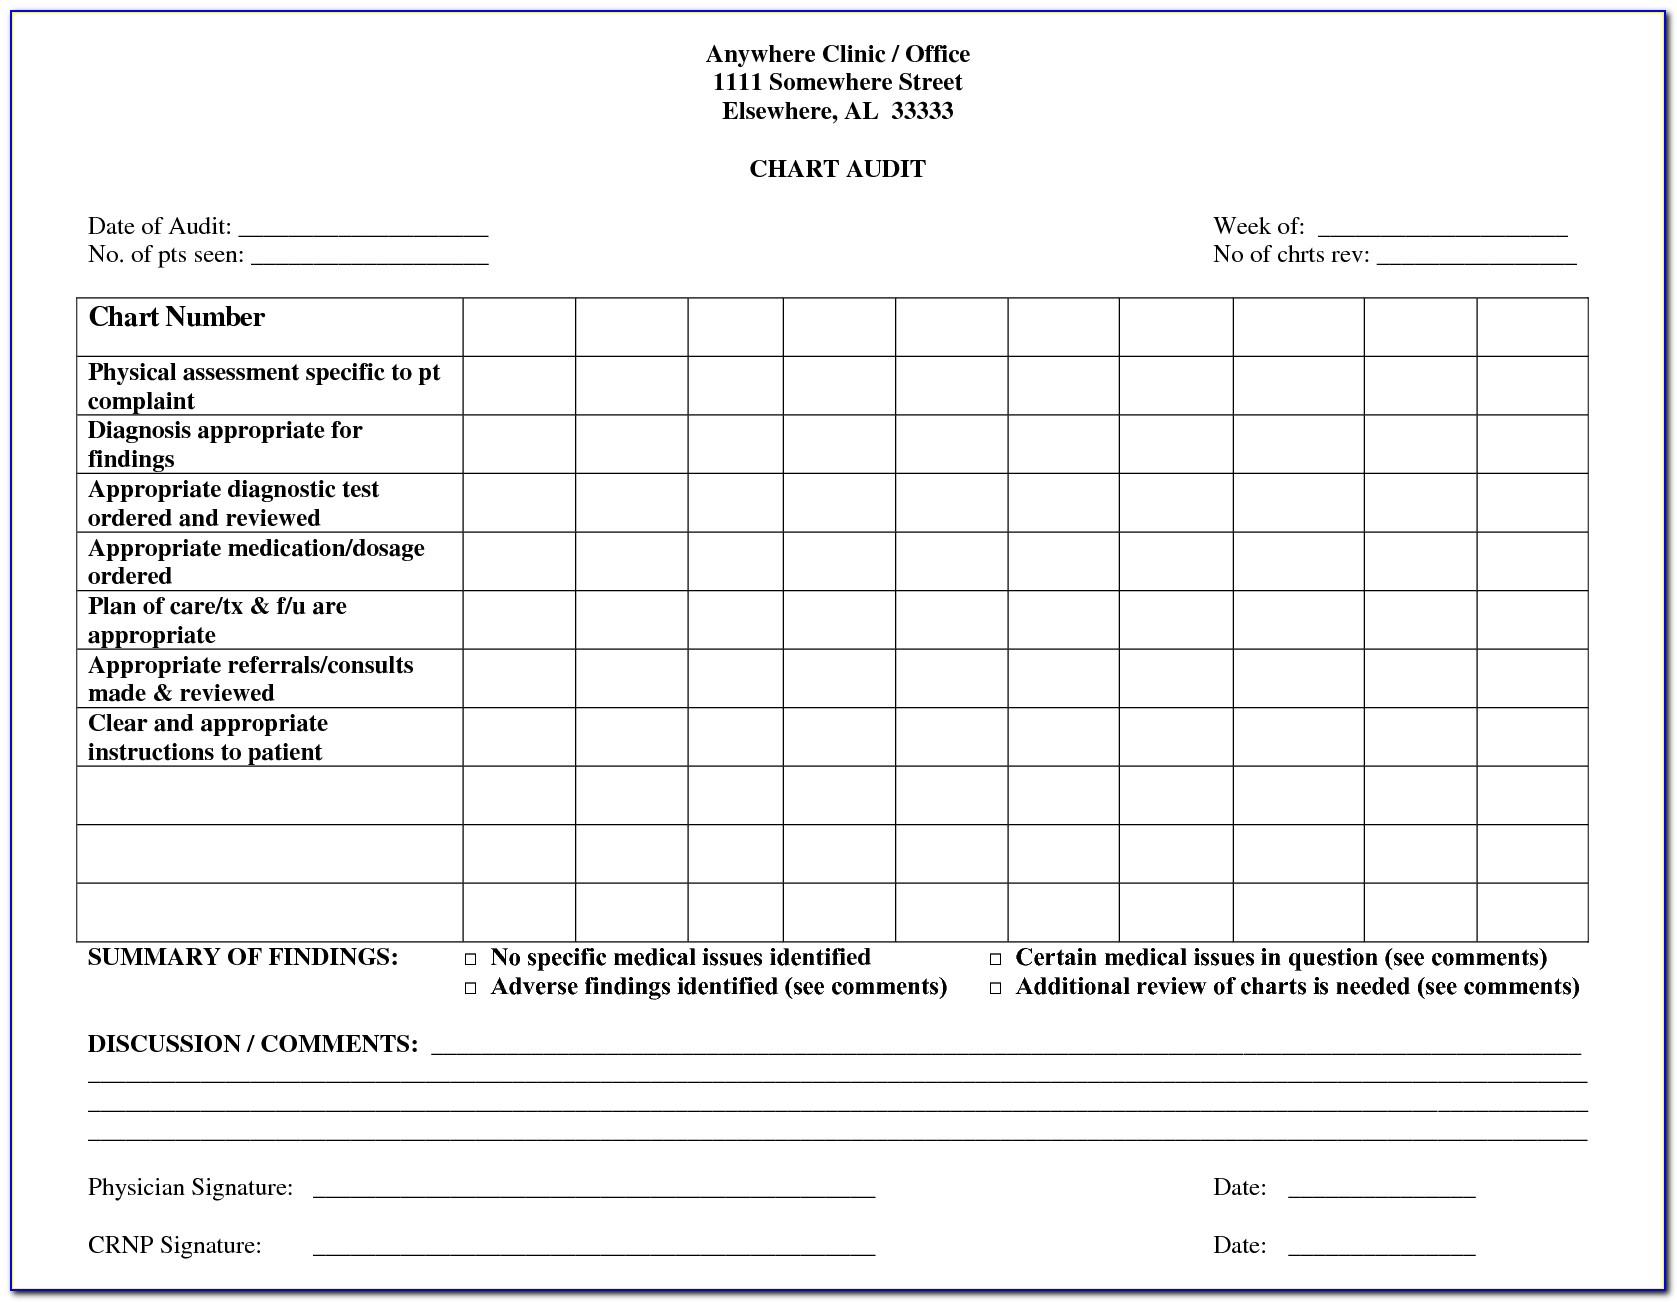 mental-health-chart-audit-form-printable-example-printable-forms-free